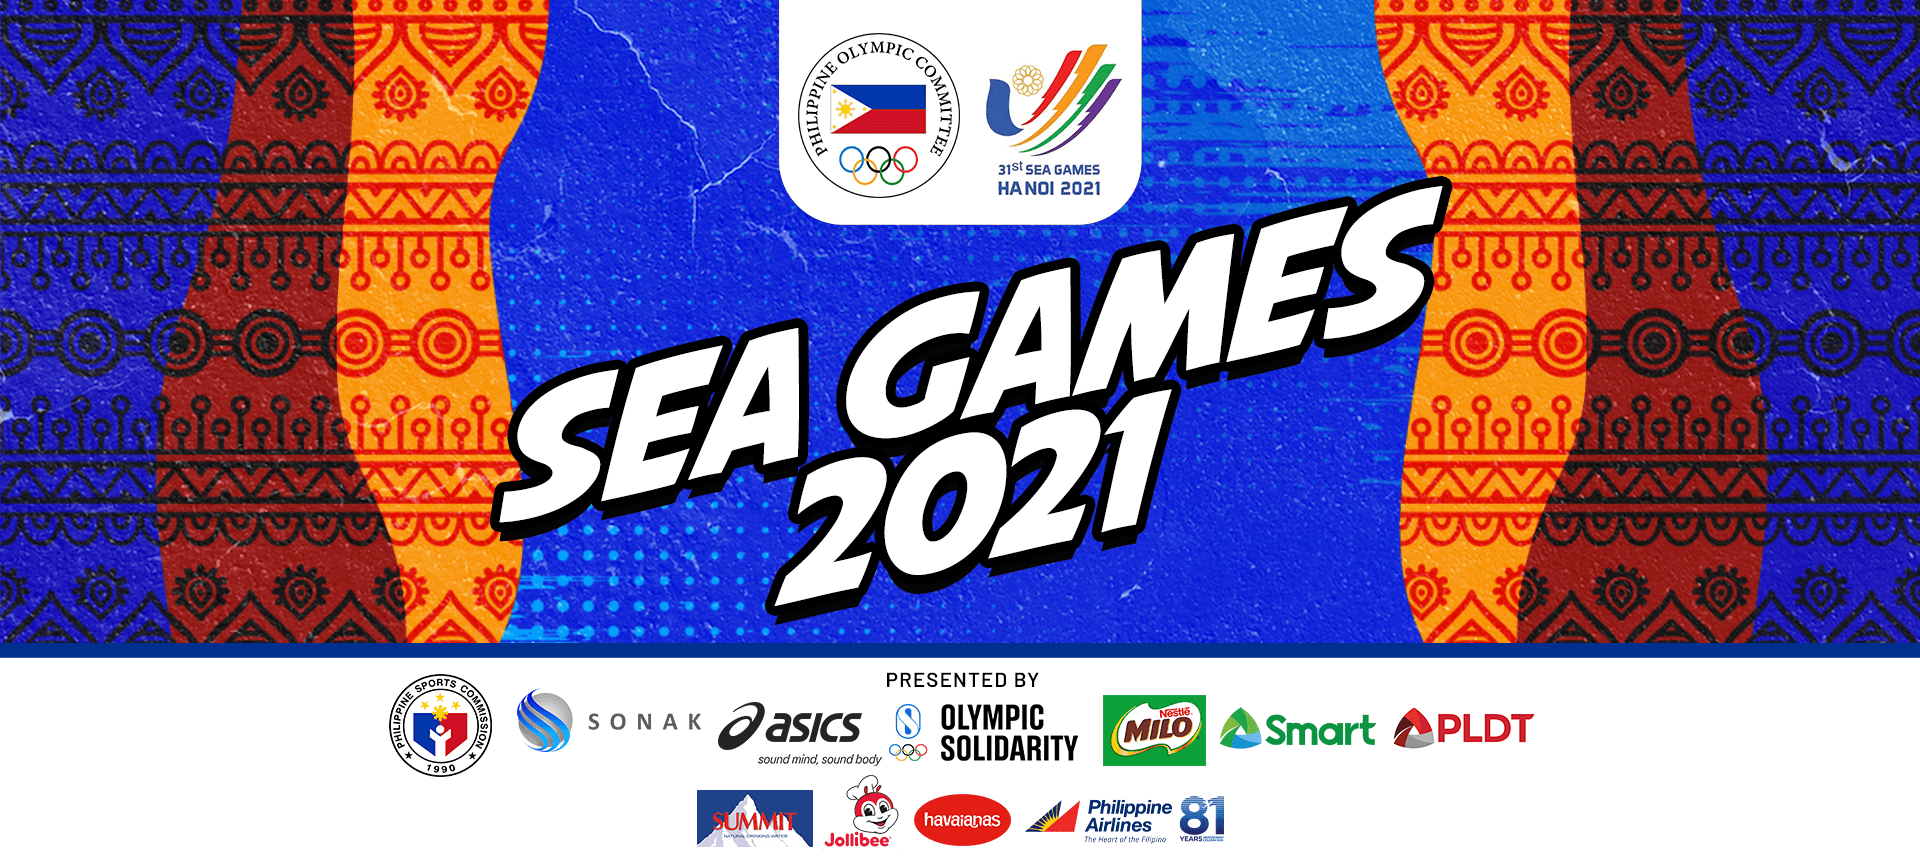 The 31st SEA Games Highlights